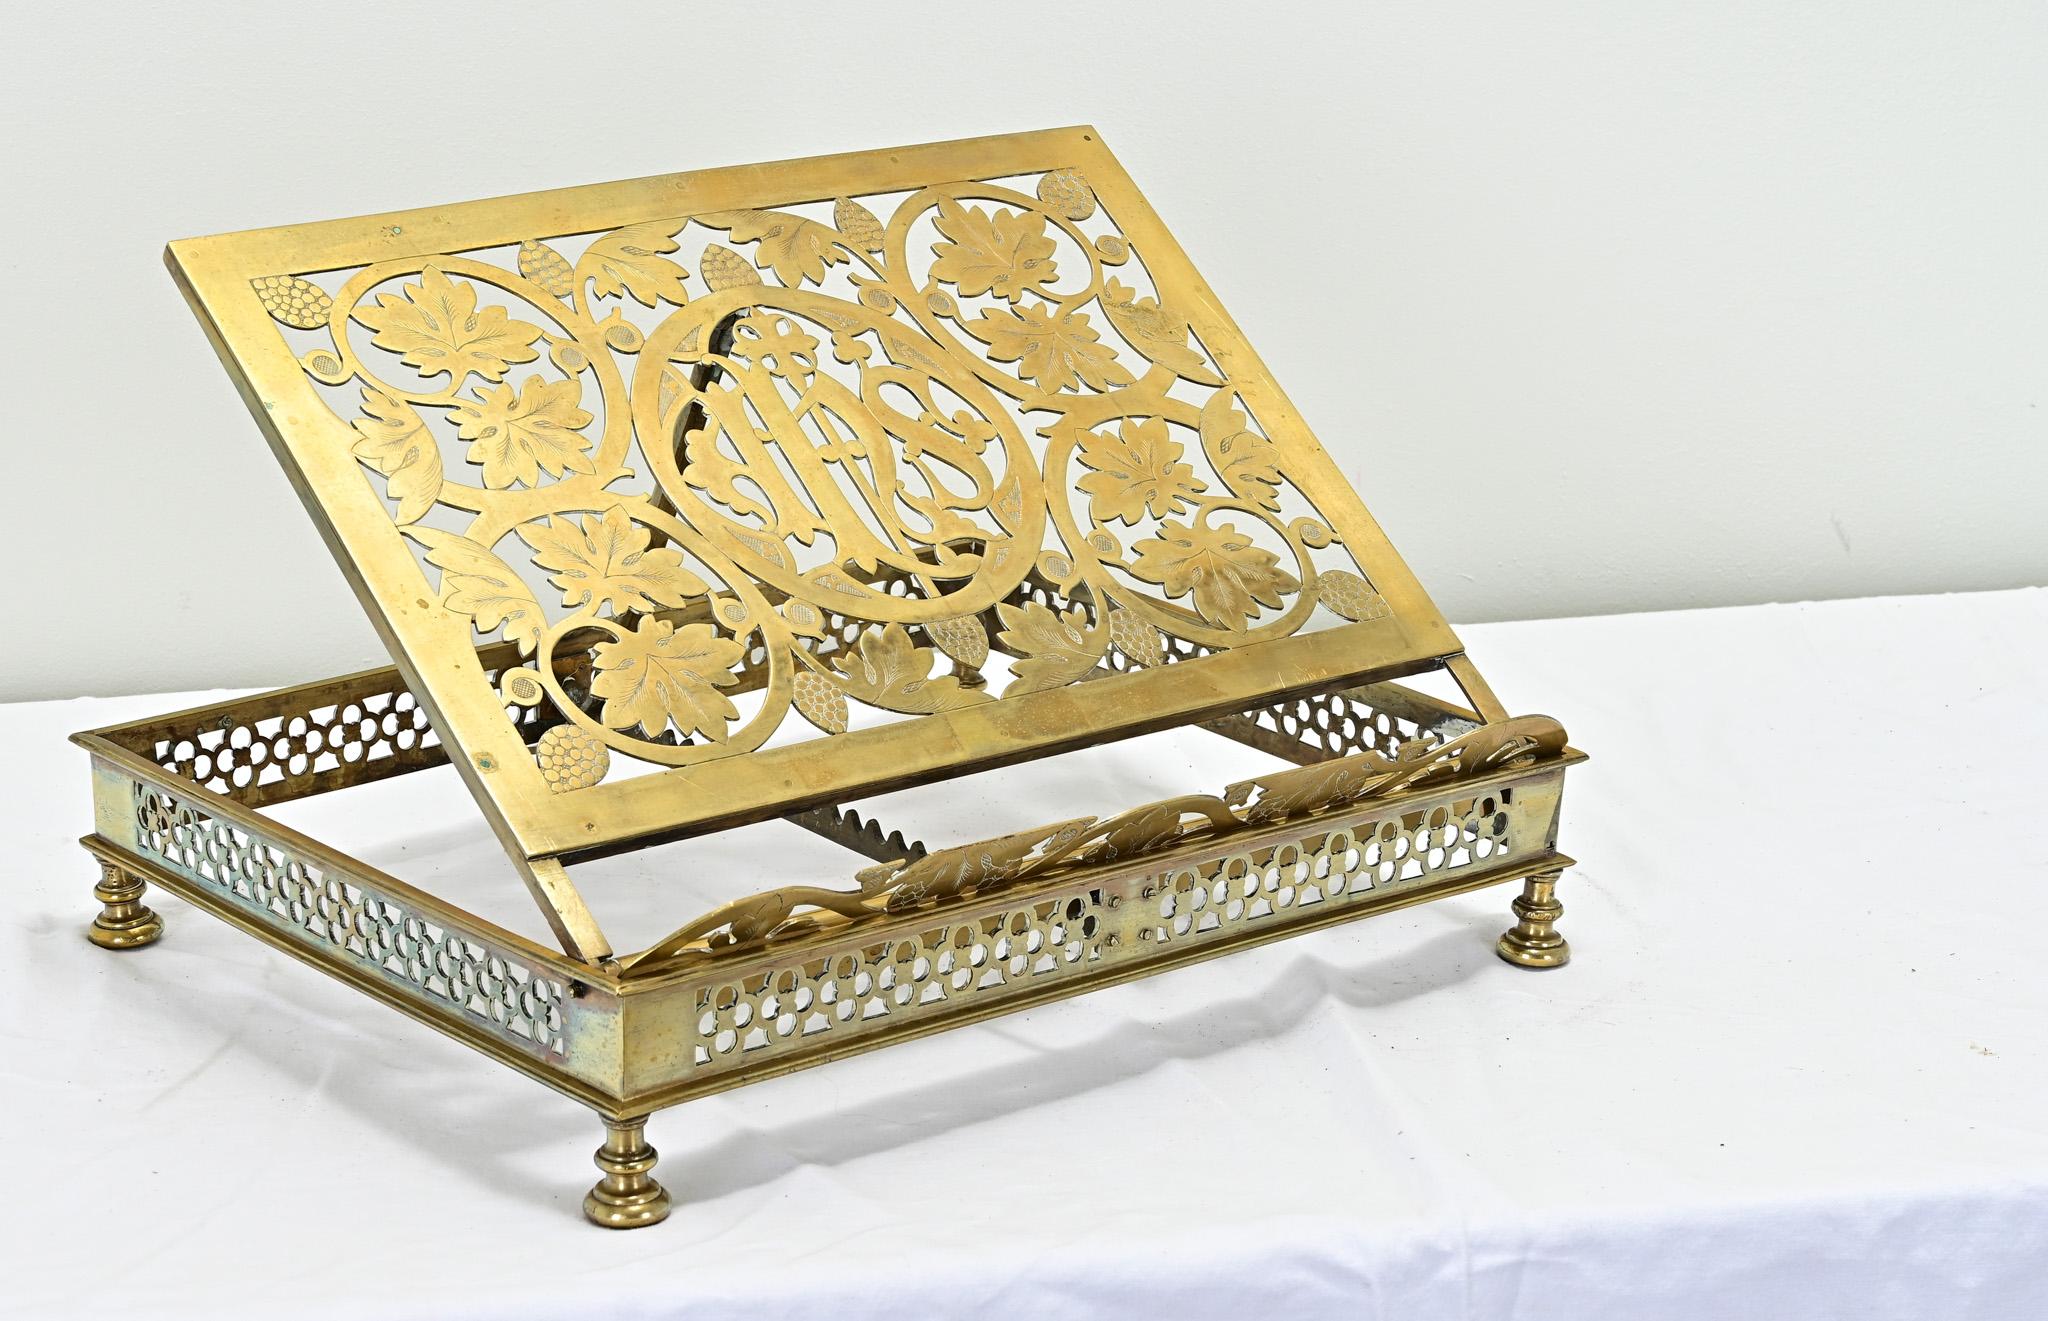 A large decorative brass Bible stand from a Catholic church. This versatile antique book stand has the ability to lay flat or to be used at adjustable angles. The detailed craftsmanship of the pierced brass and etching is impressive and symbolizes